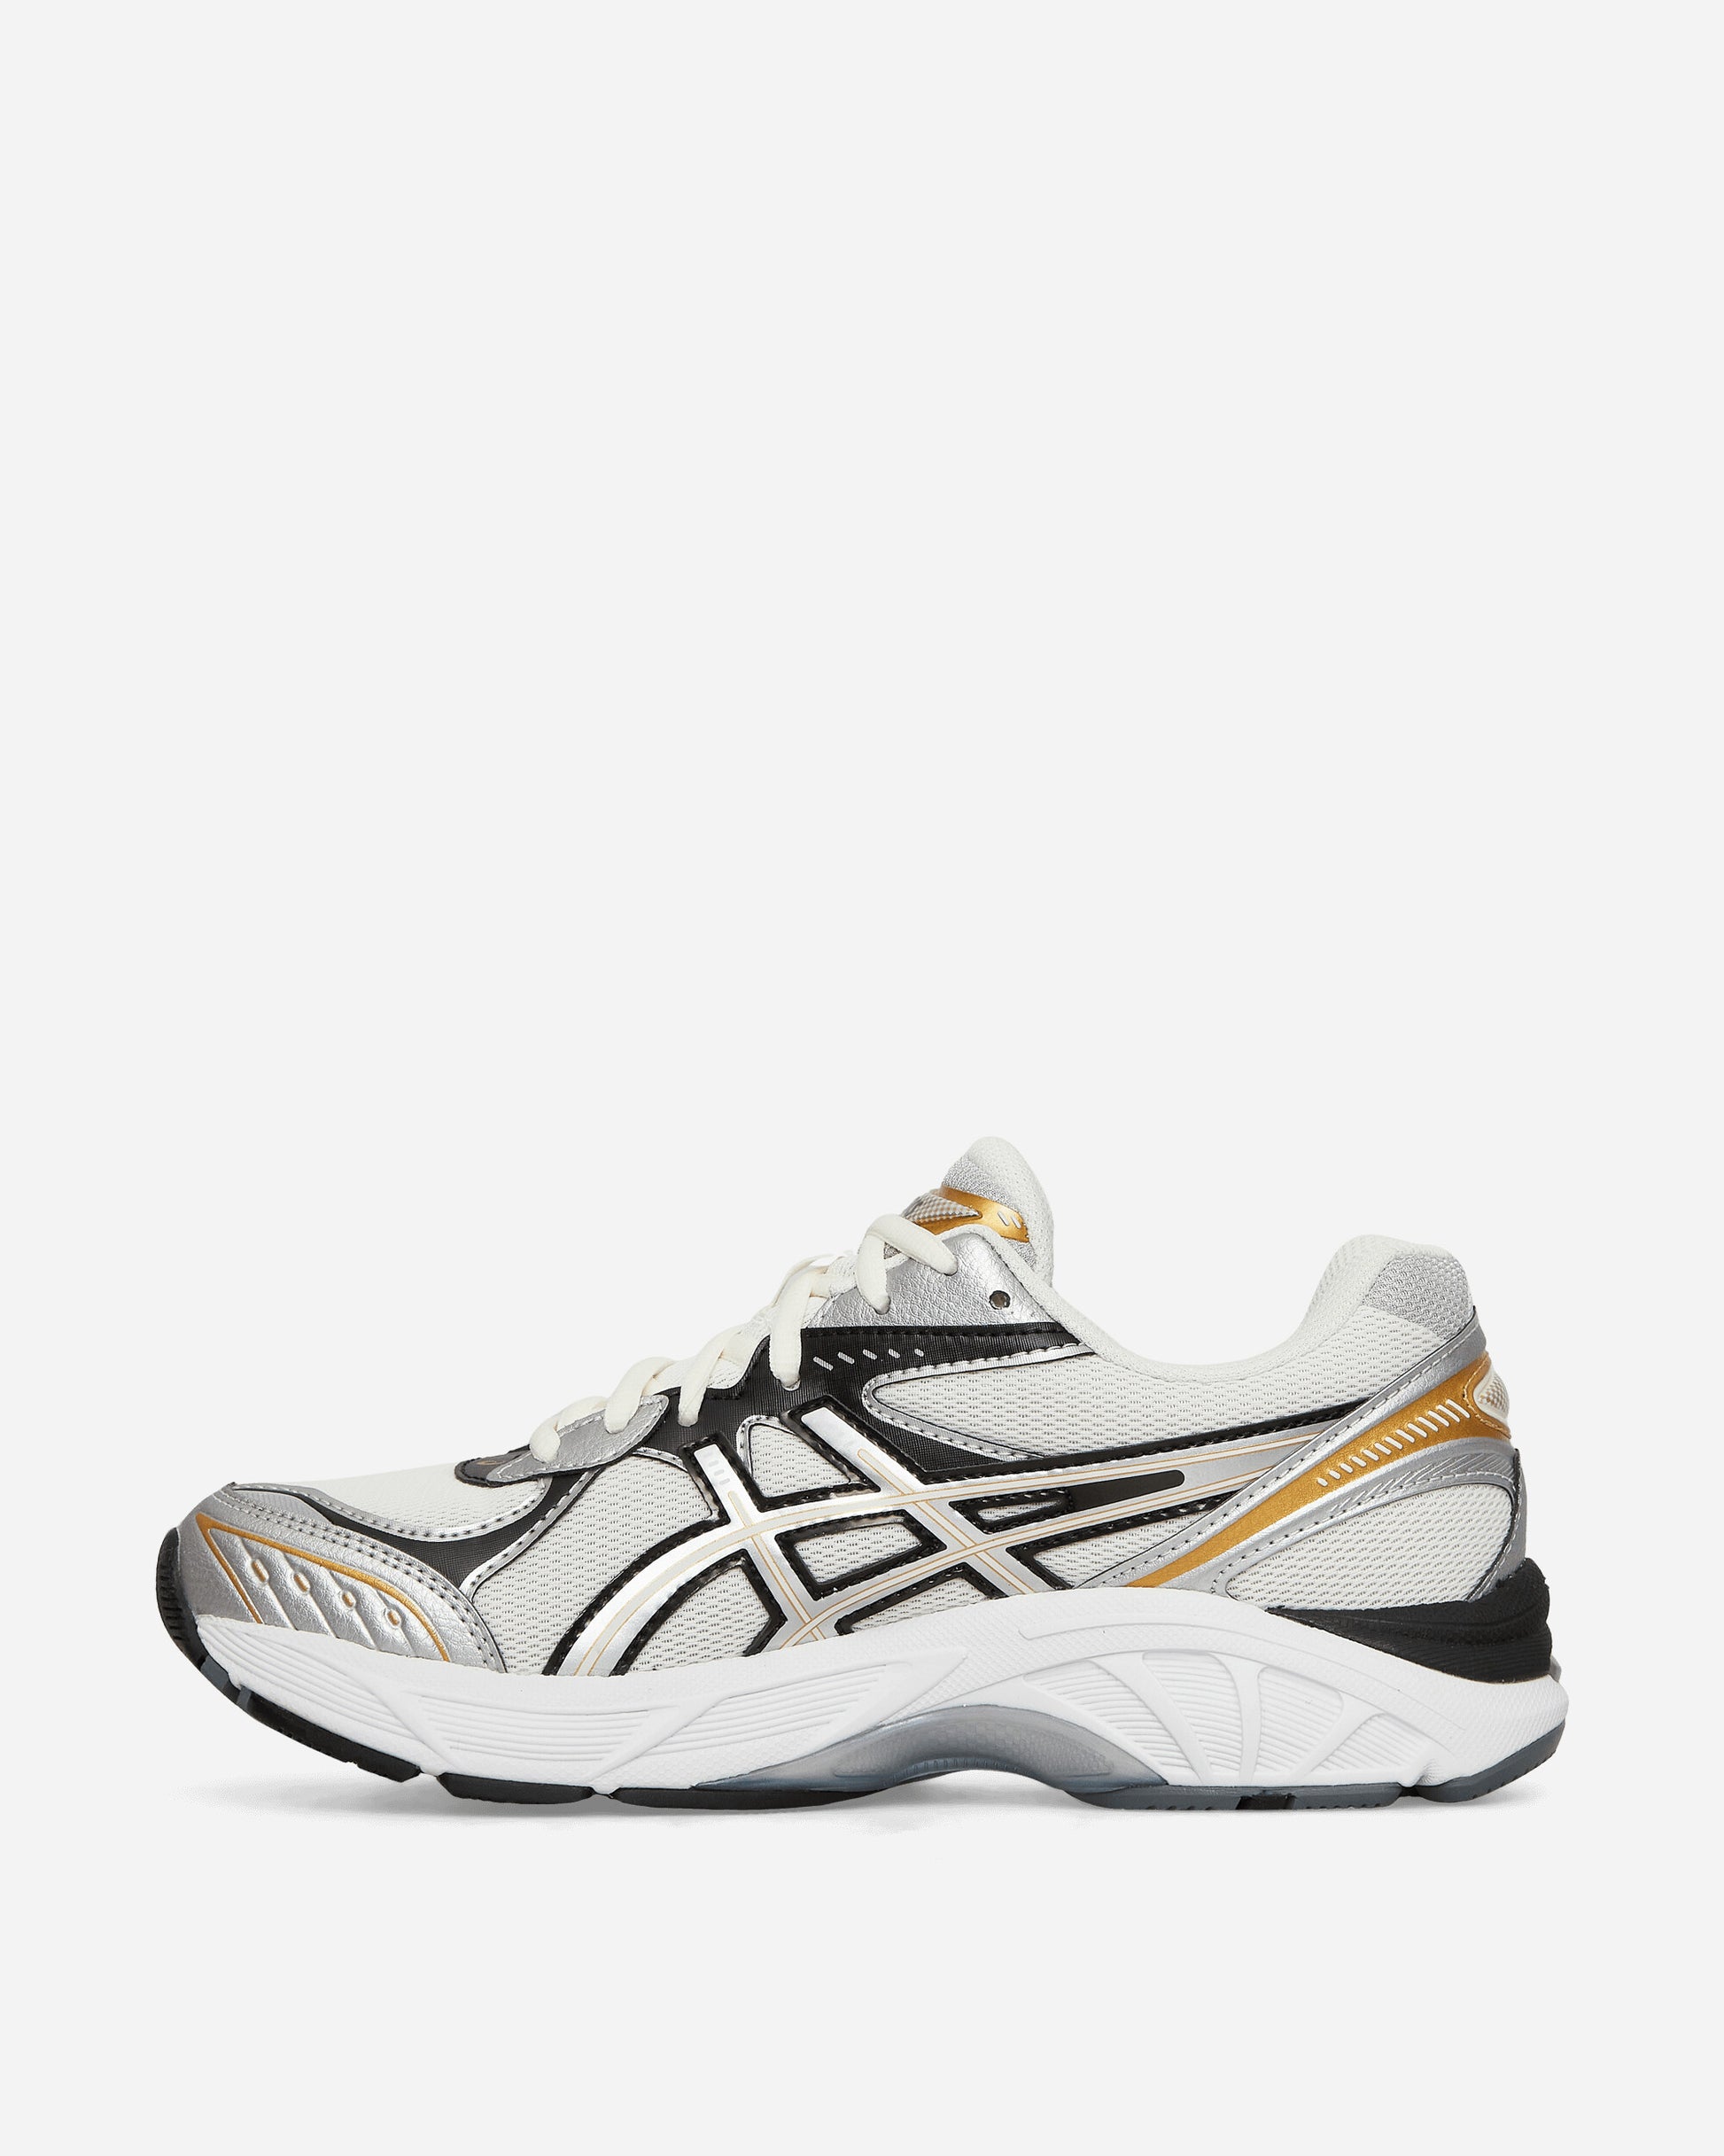 Asics Gt-2160 Cream/Pure Silver Sneakers Low 1203A320-100